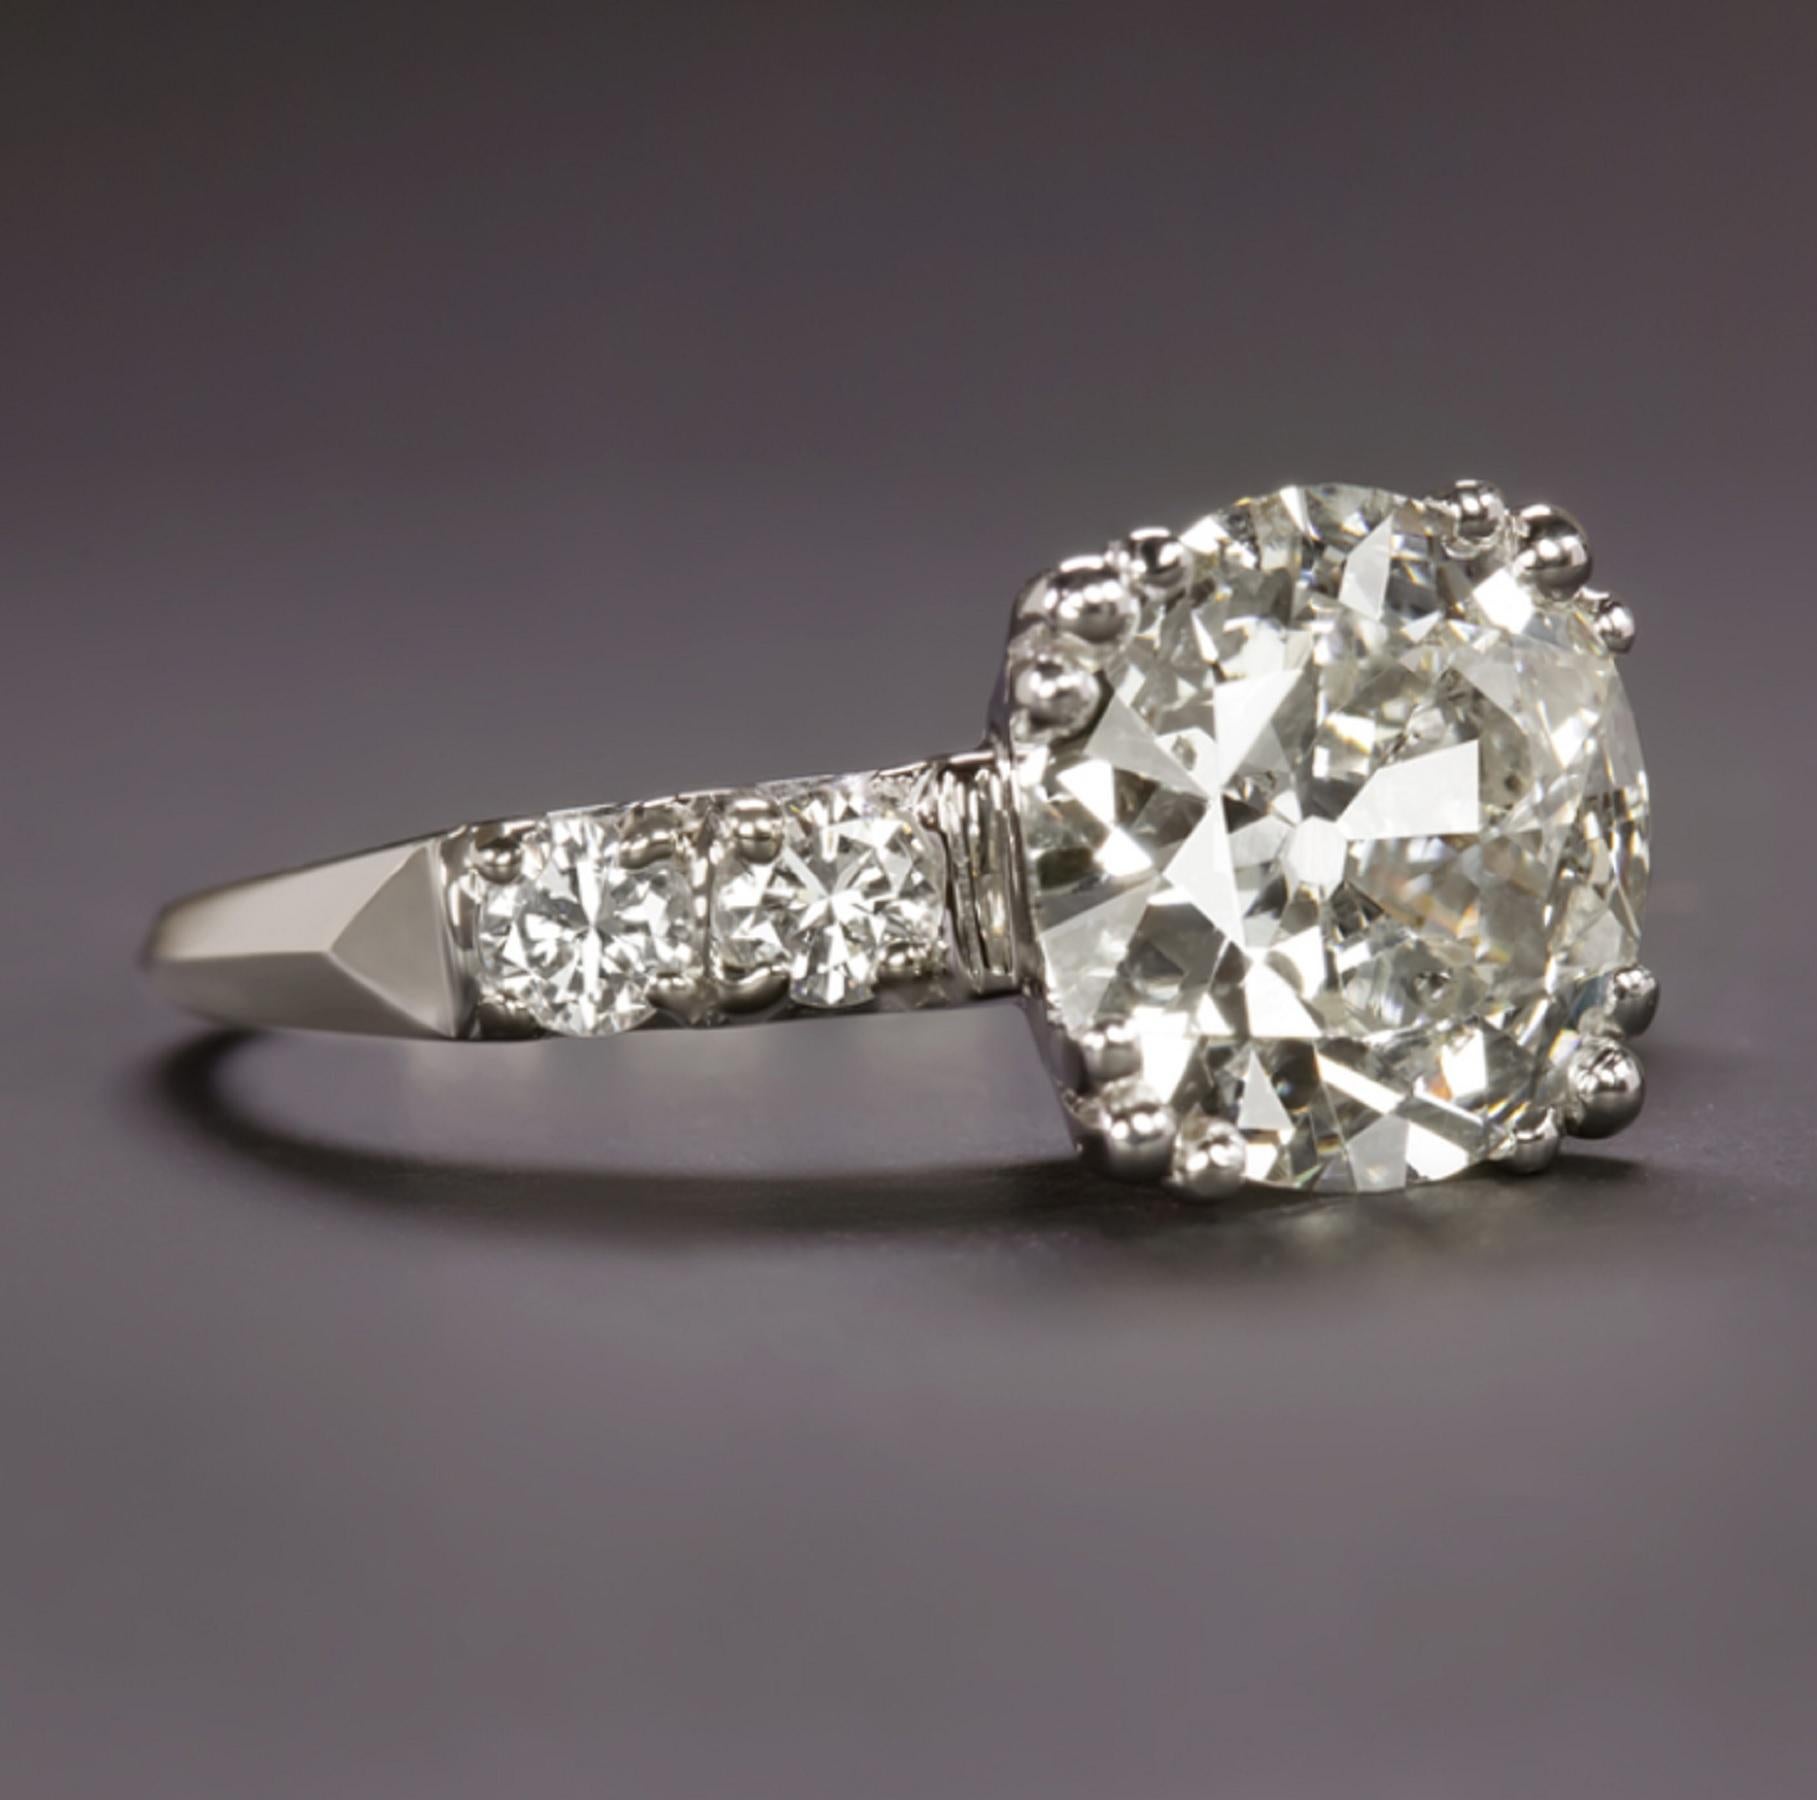 classic vintage engagement ring is dazzling with brilliant sparkle and beautifully crafted in solid platinum with simple yet elegant details. The 2ct old European cut certified diamond is impressive in size, beautifully white, eye clean, and